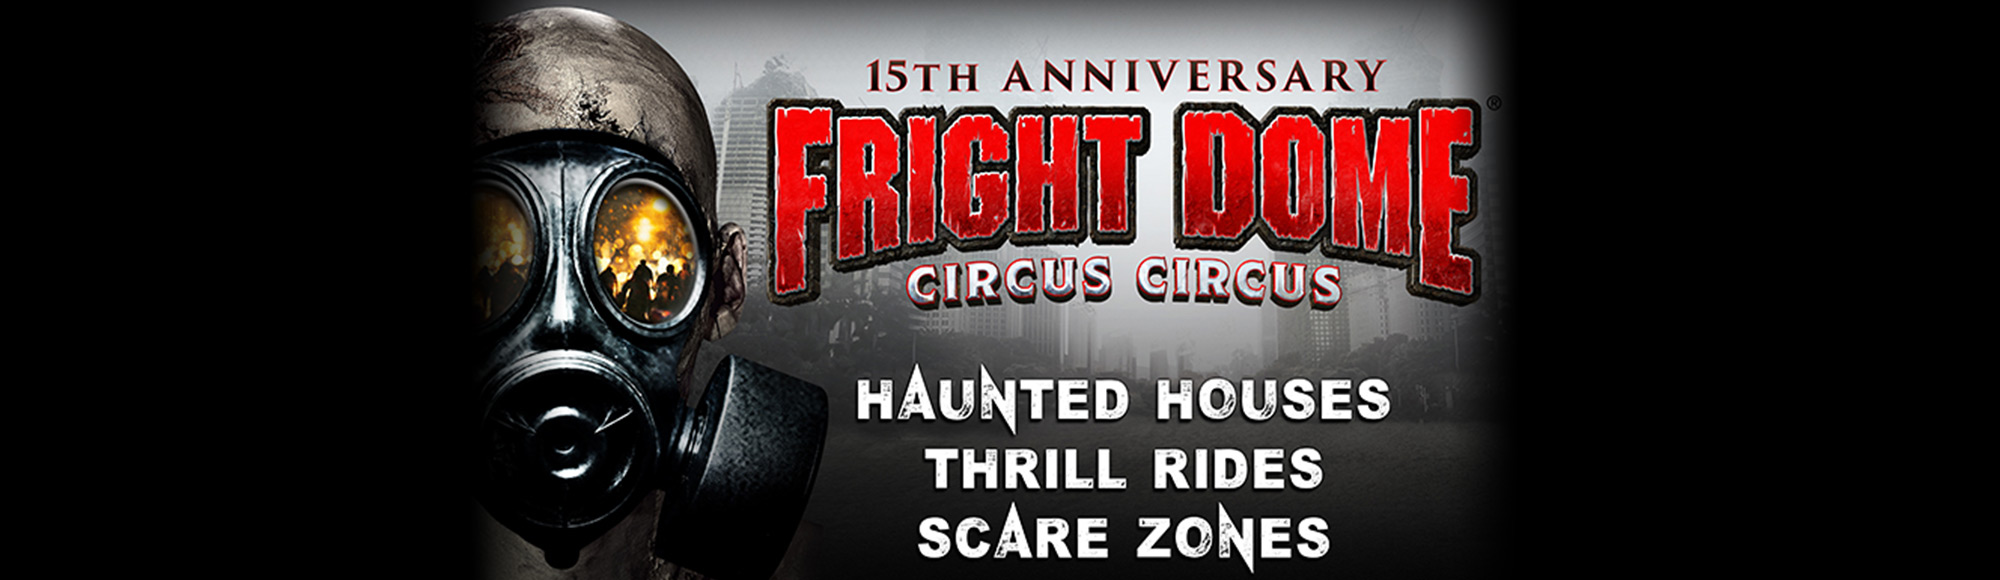 Fright Dome Las Vegas Tickets & Reviews